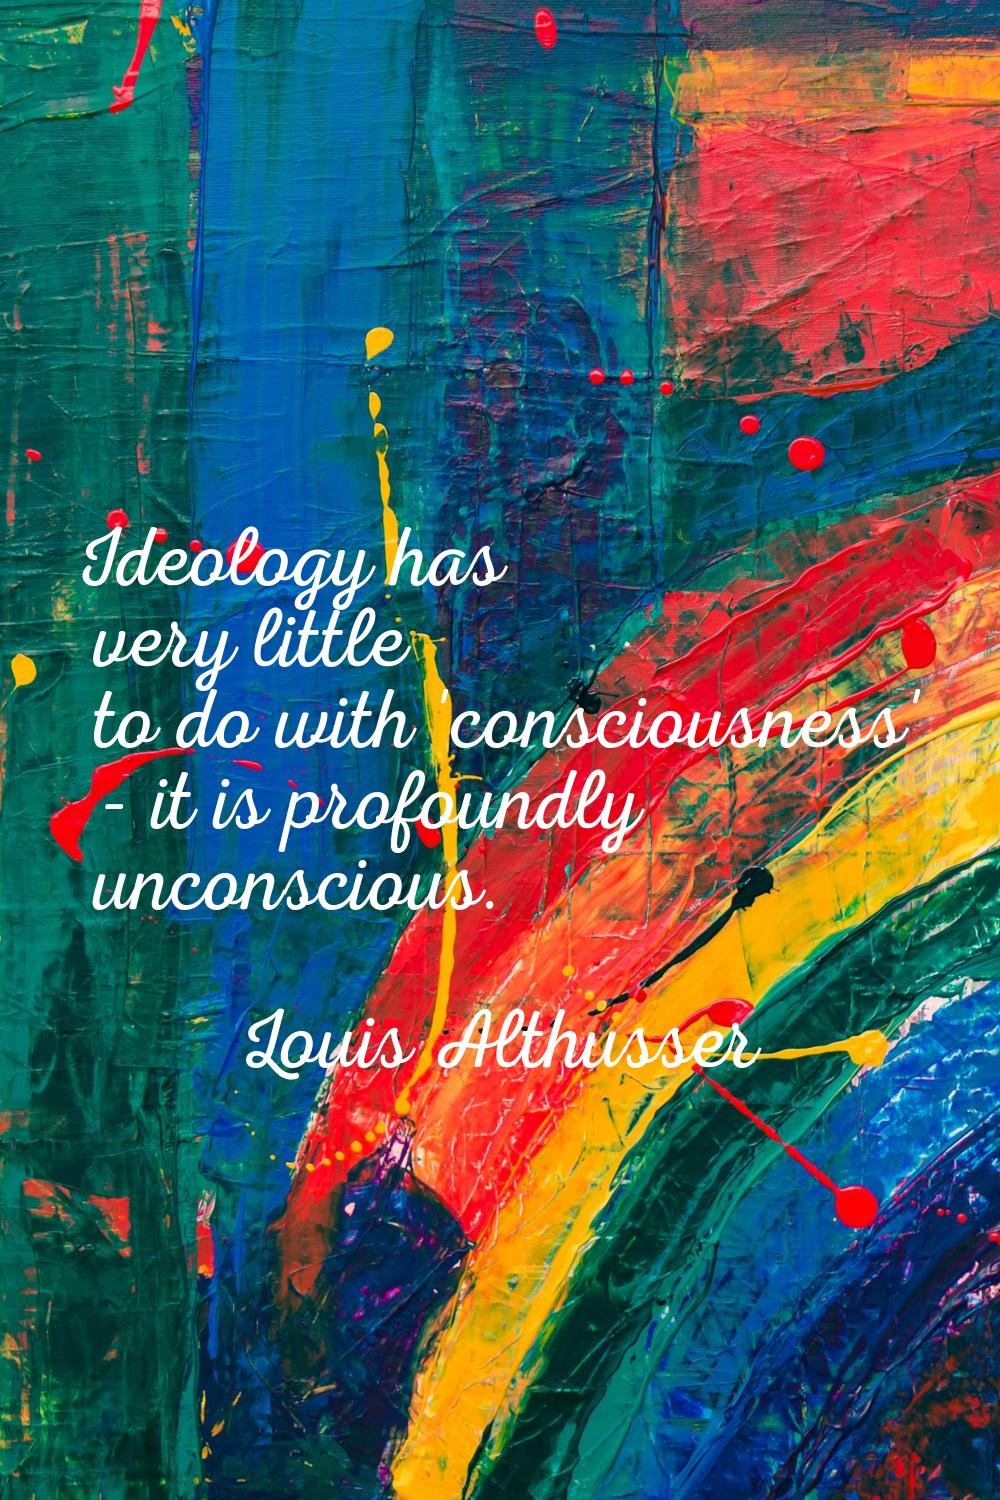 Ideology has very little to do with 'consciousness' - it is profoundly unconscious.